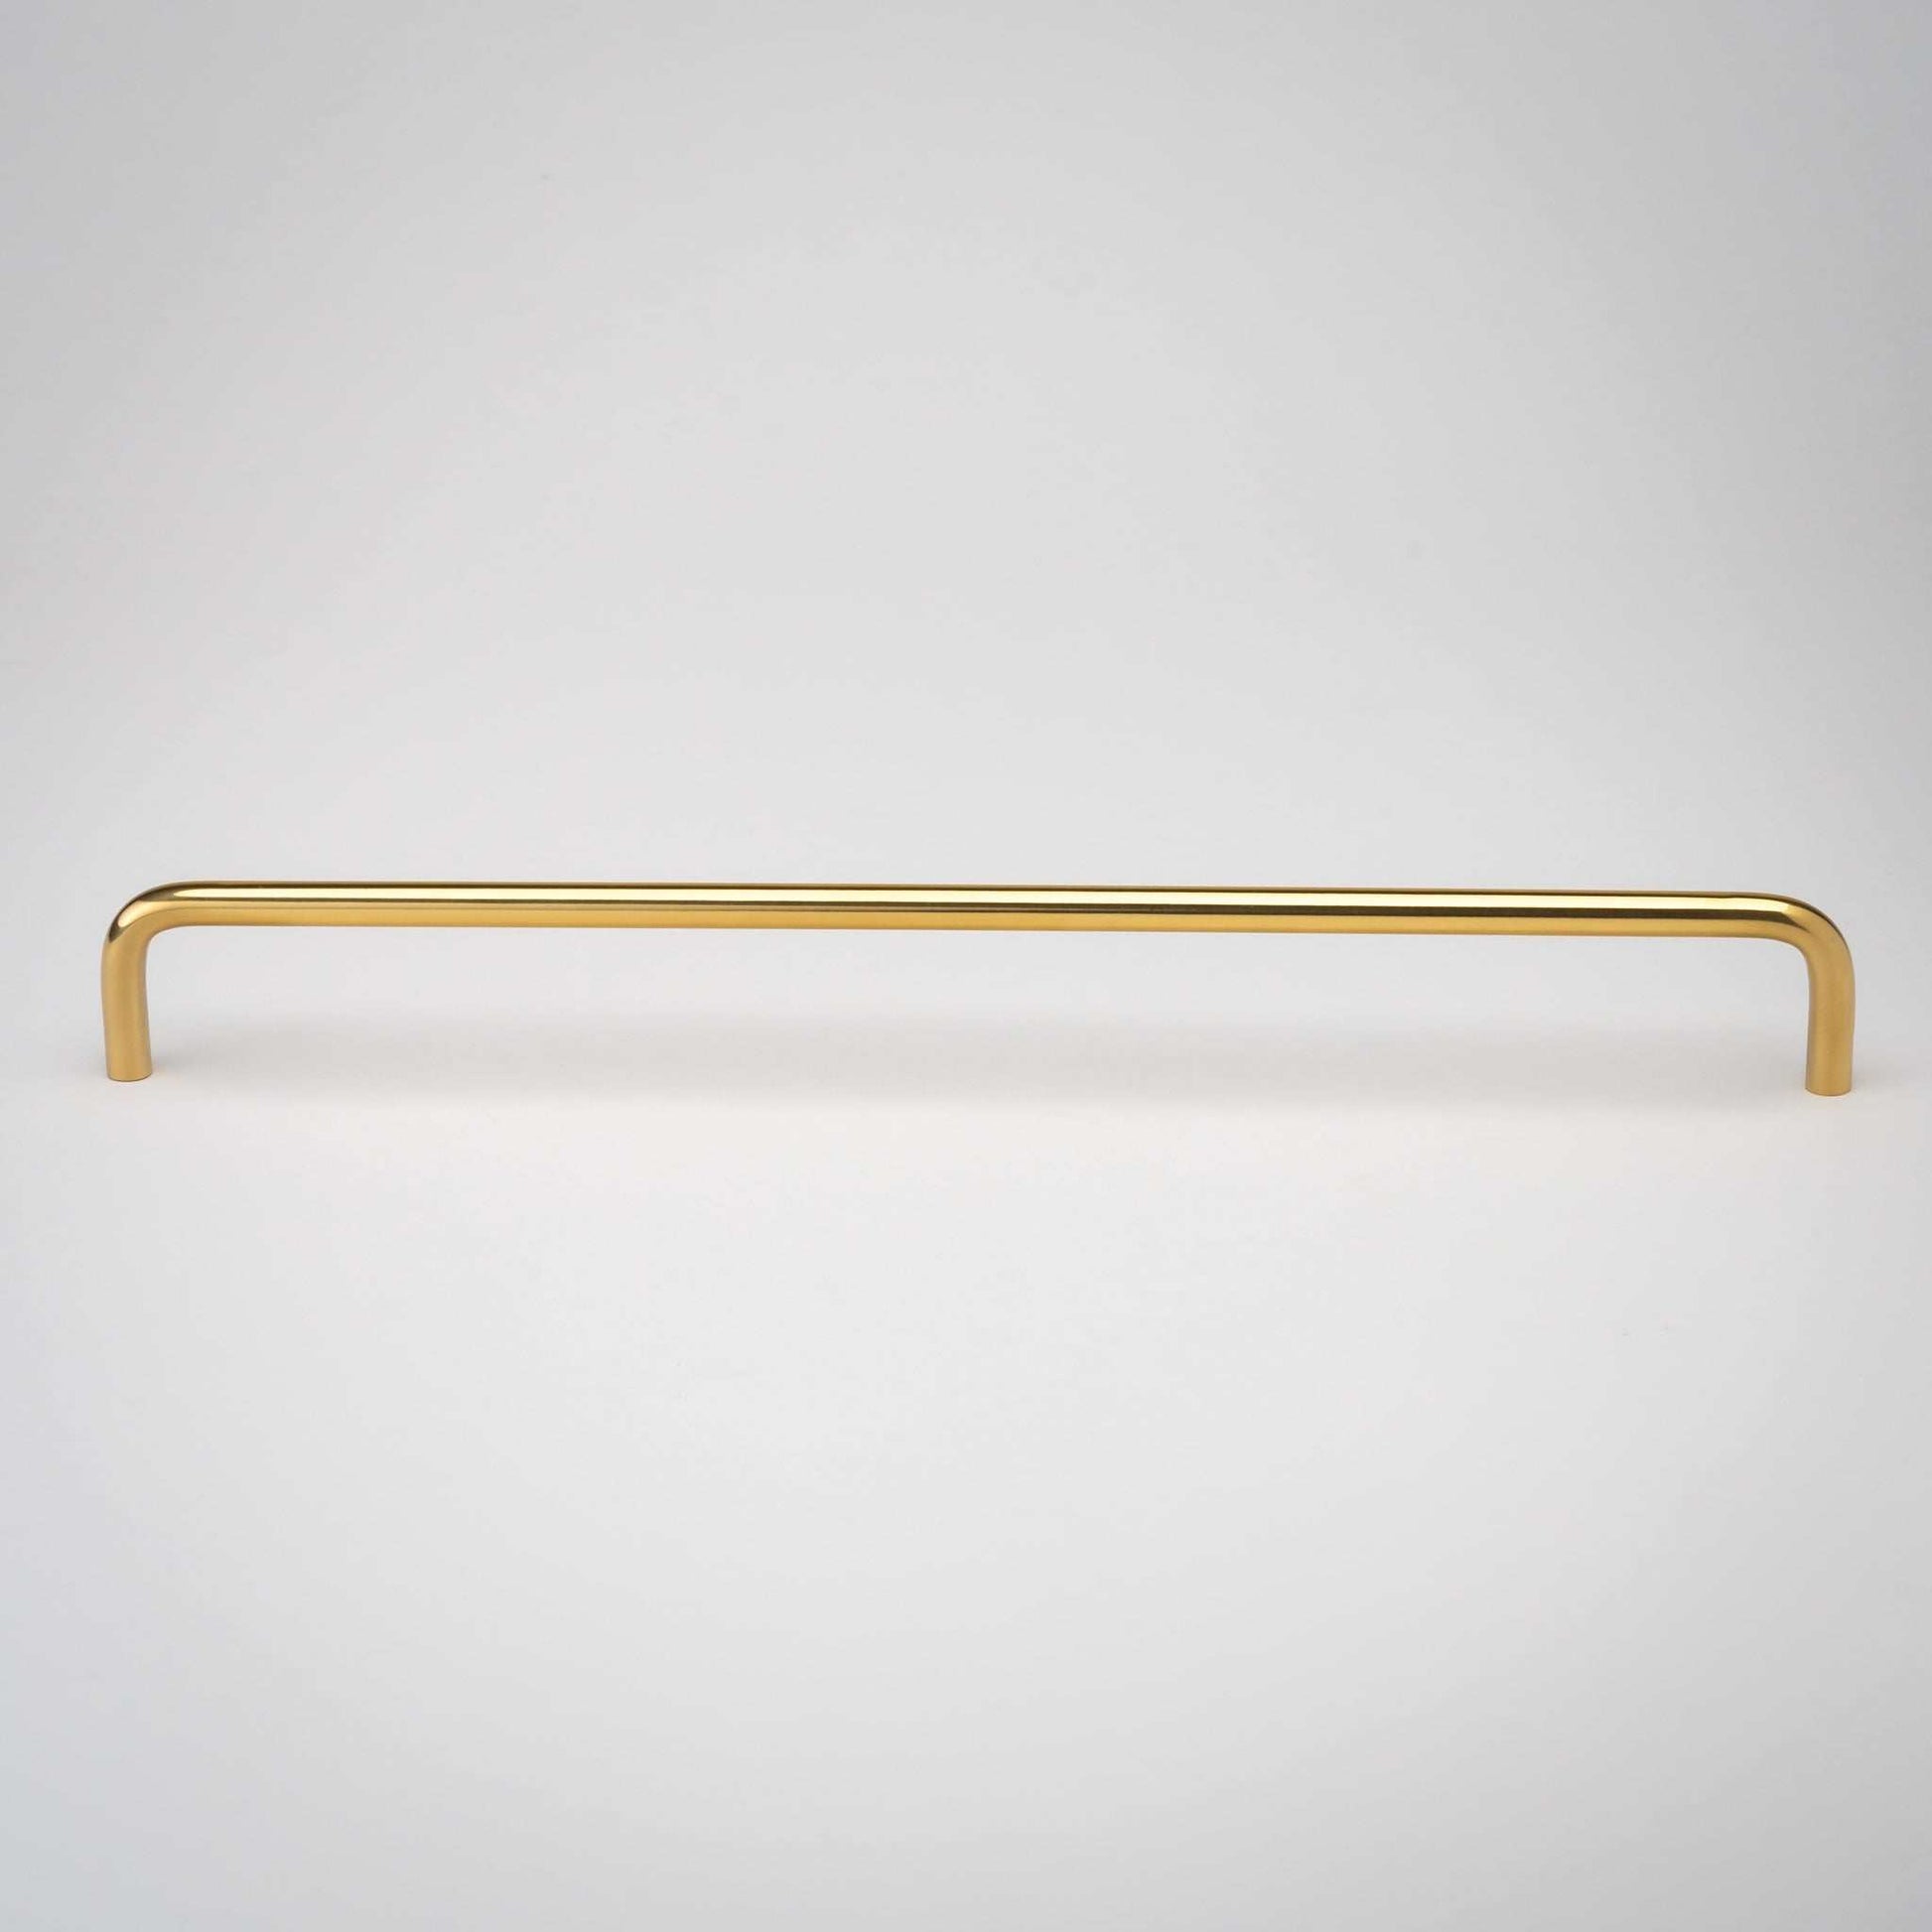 12" Arch in polished brass finish